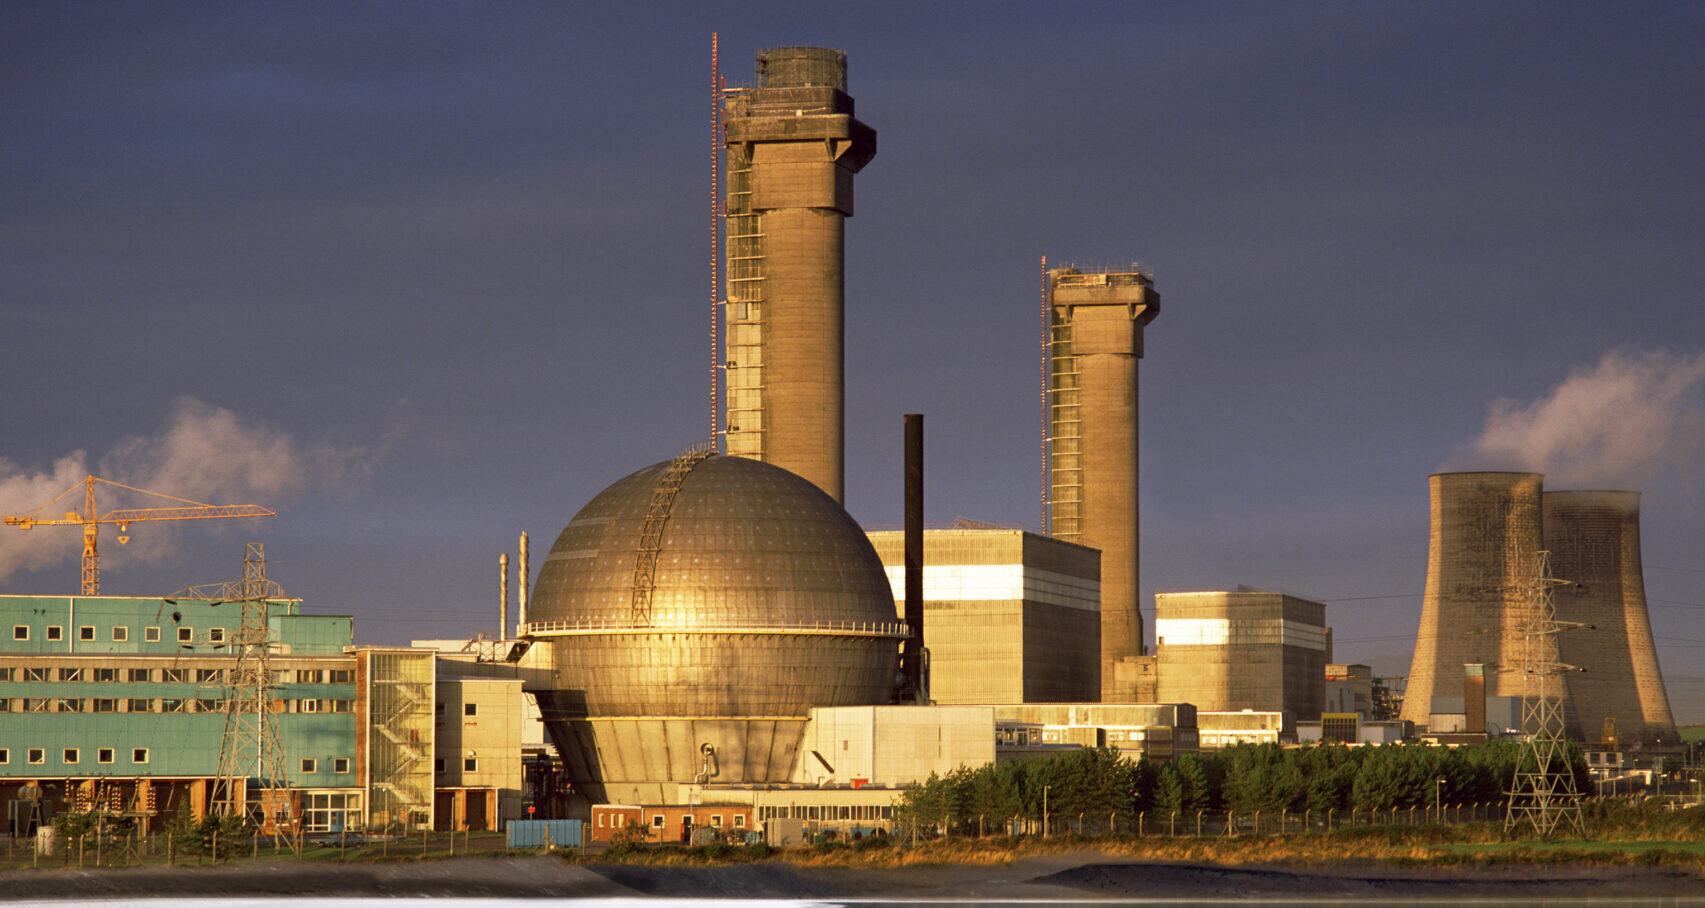 Sellafield Nuclear Reprocessing Plant